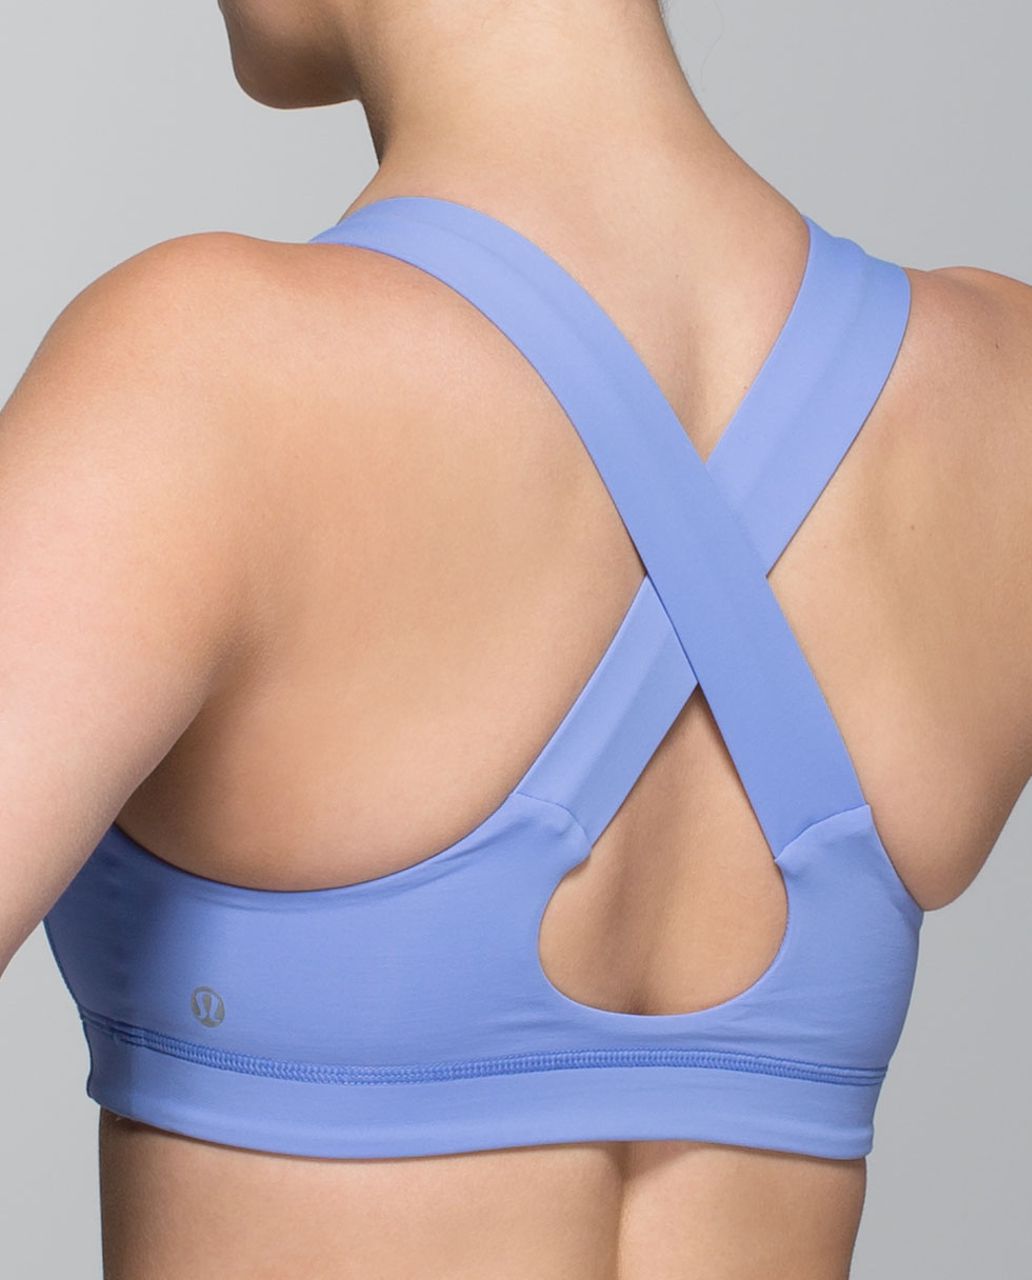 Lululemon All Sport Bra - Wee Are From Space Limitless Blue Black